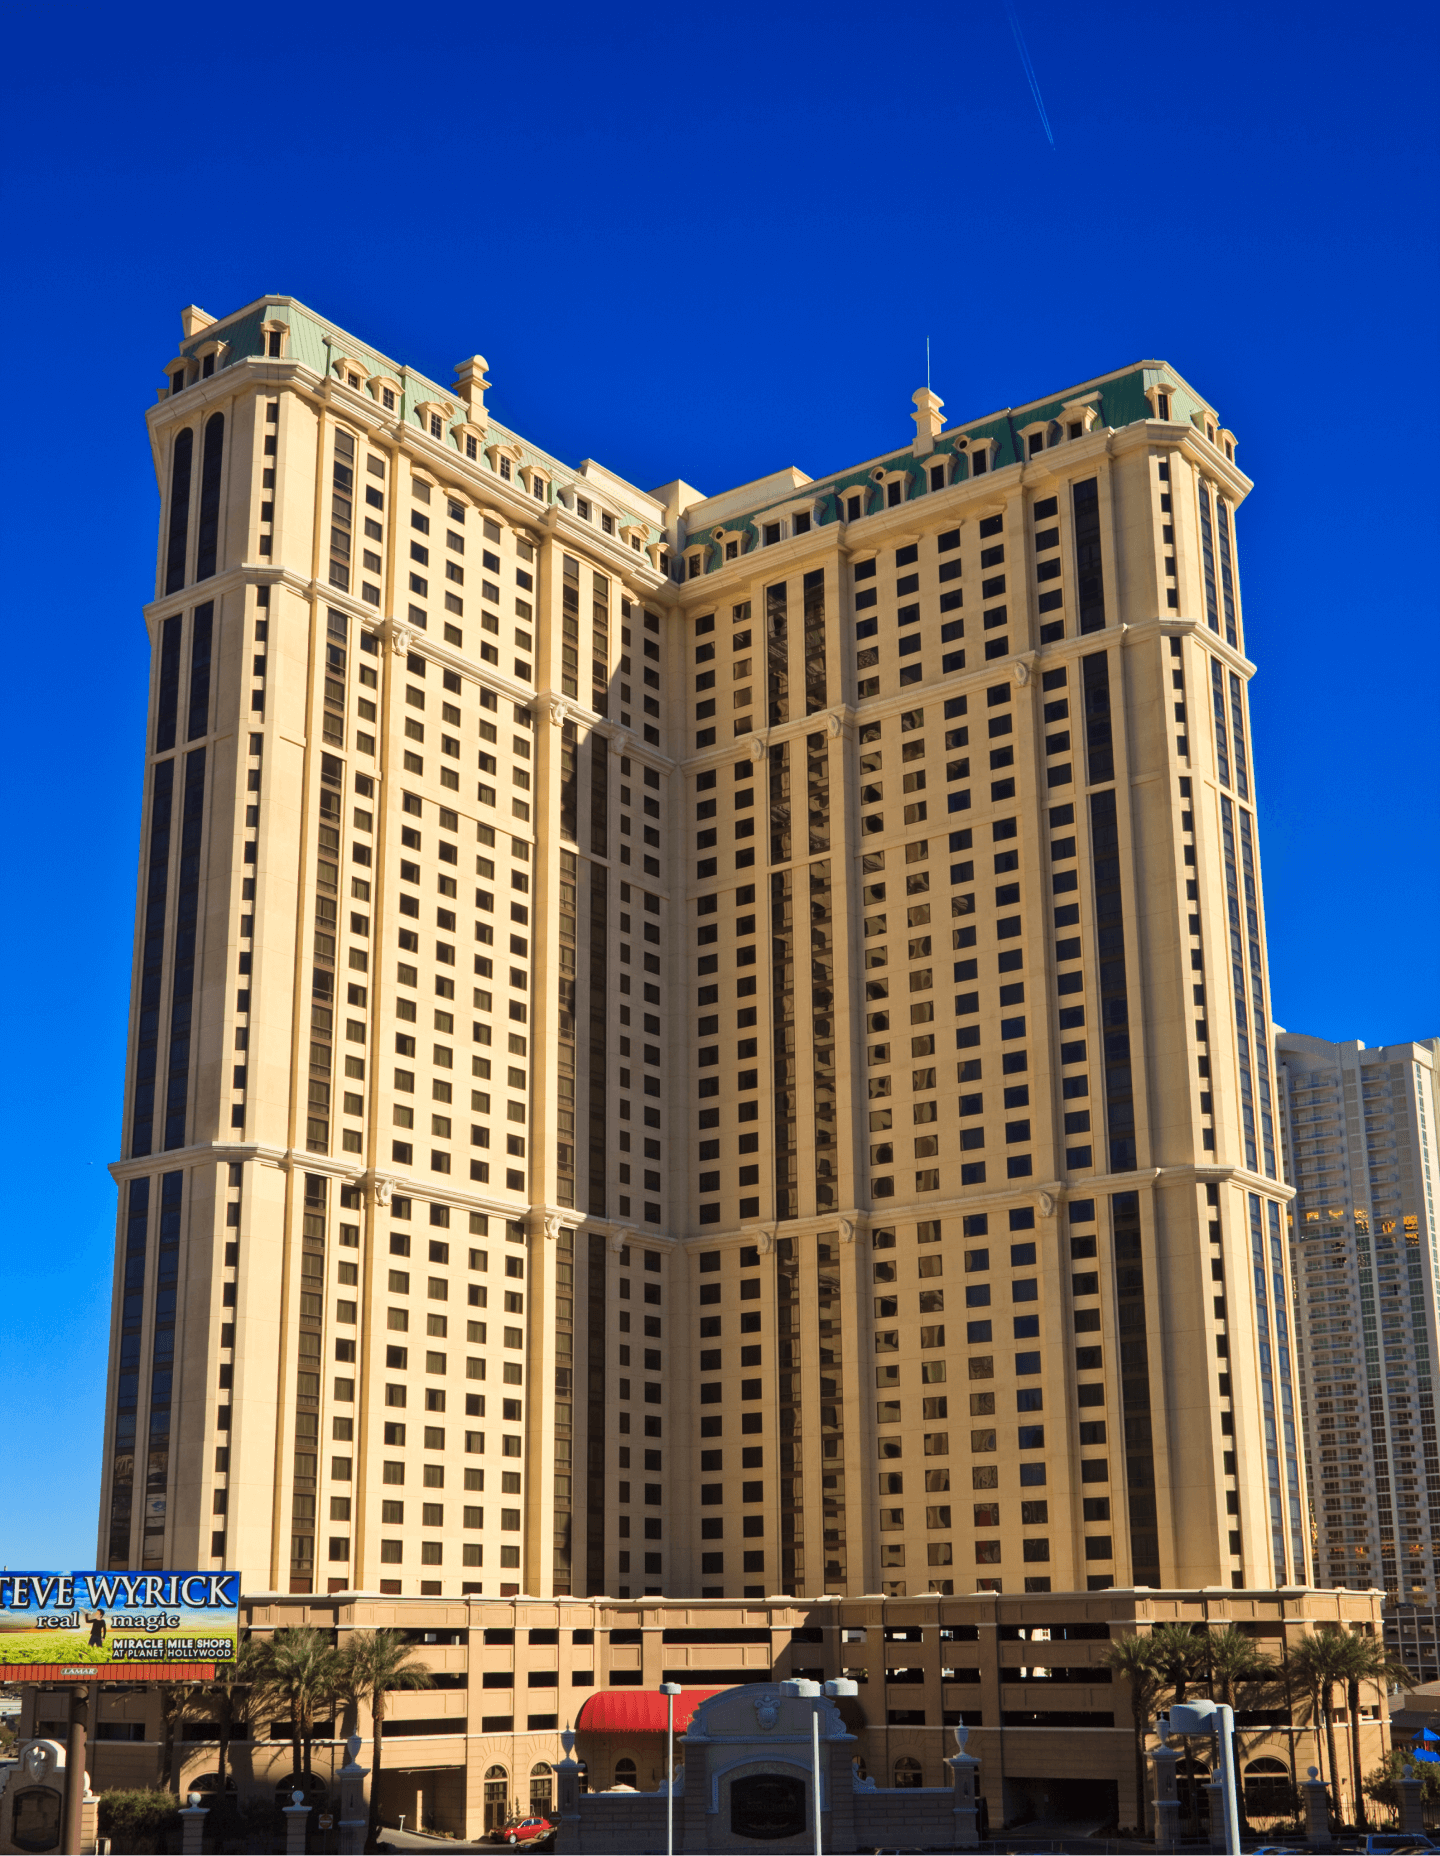 Marriott's Grand Chateau Timeshares